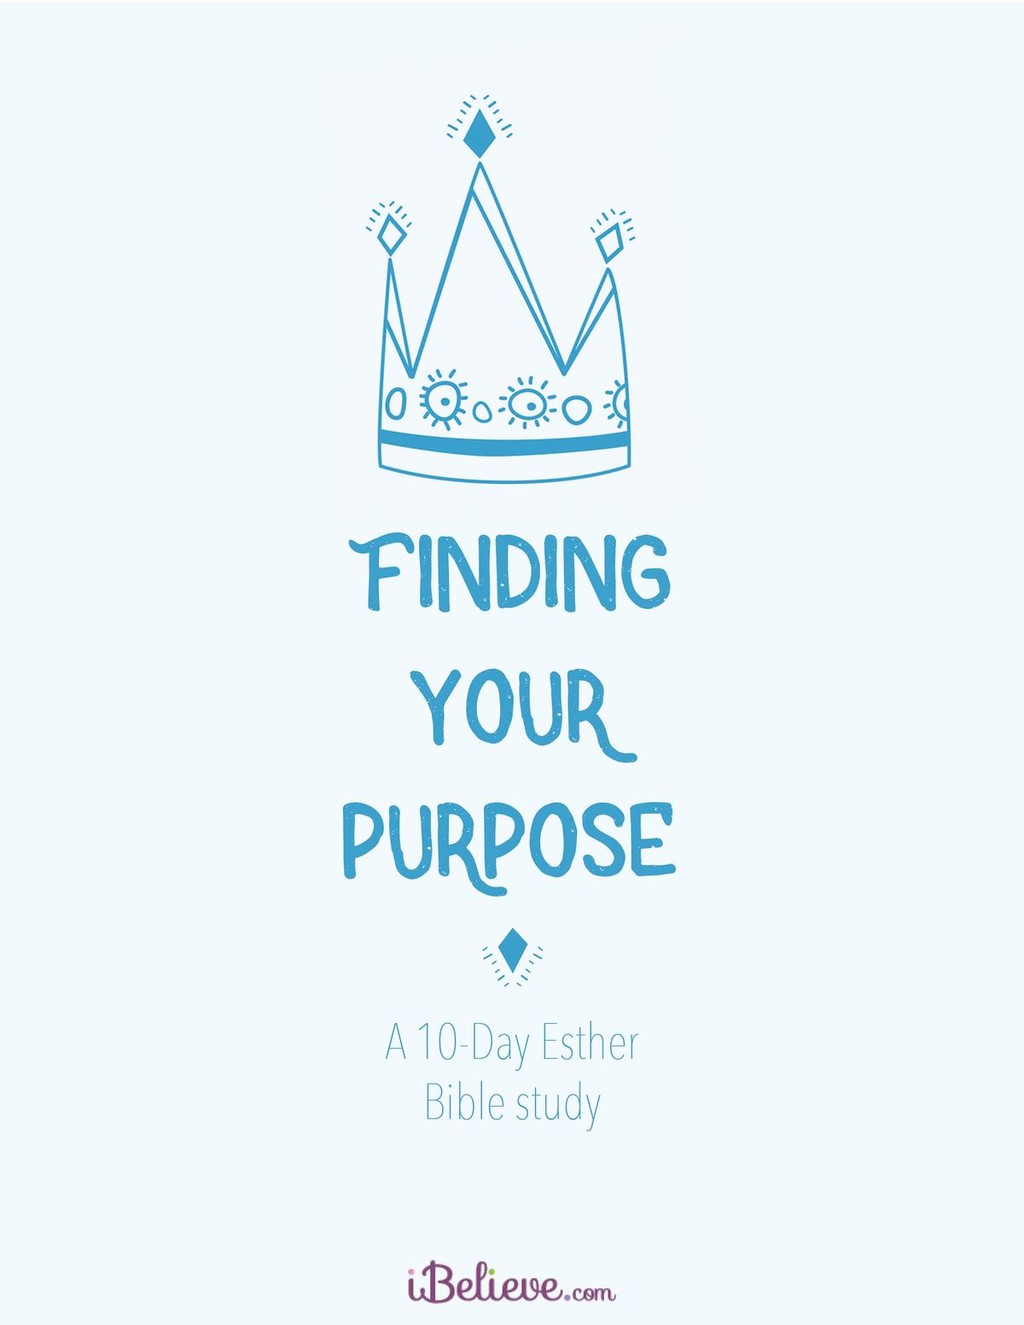 Finding Your Purpose - A 10-Day Esther Study